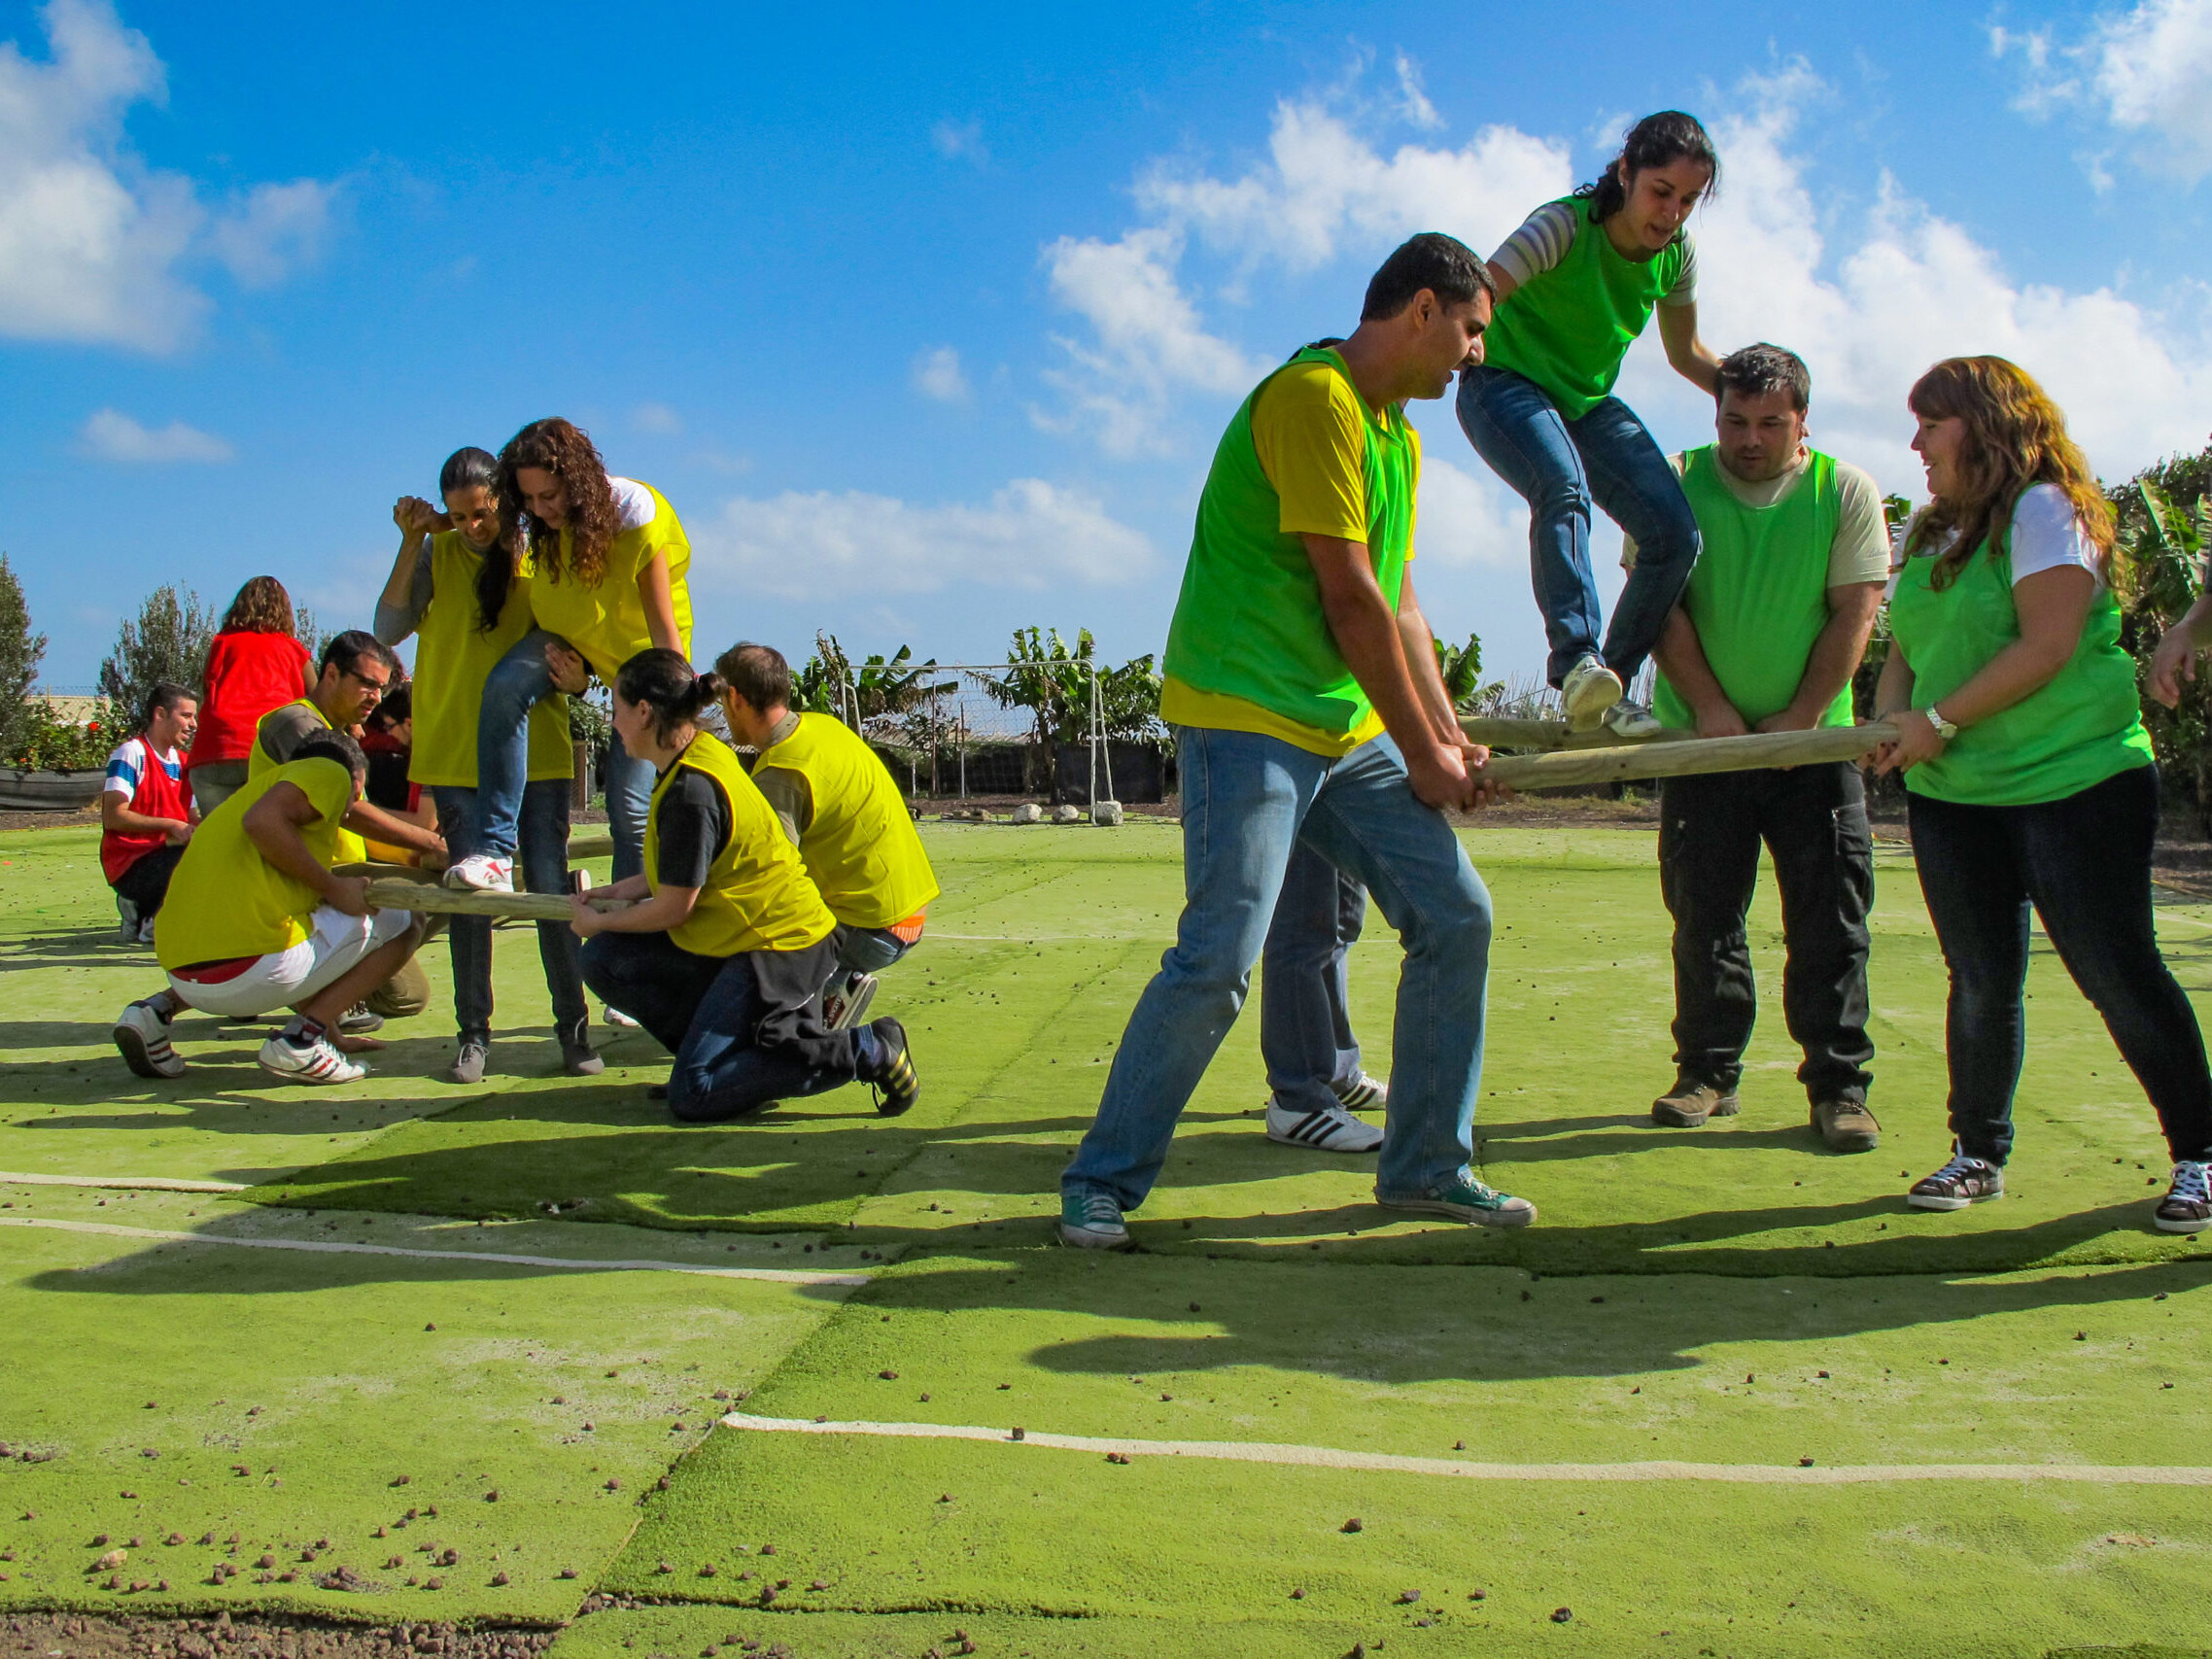 A group of people wearing green playing a team building game on a green field